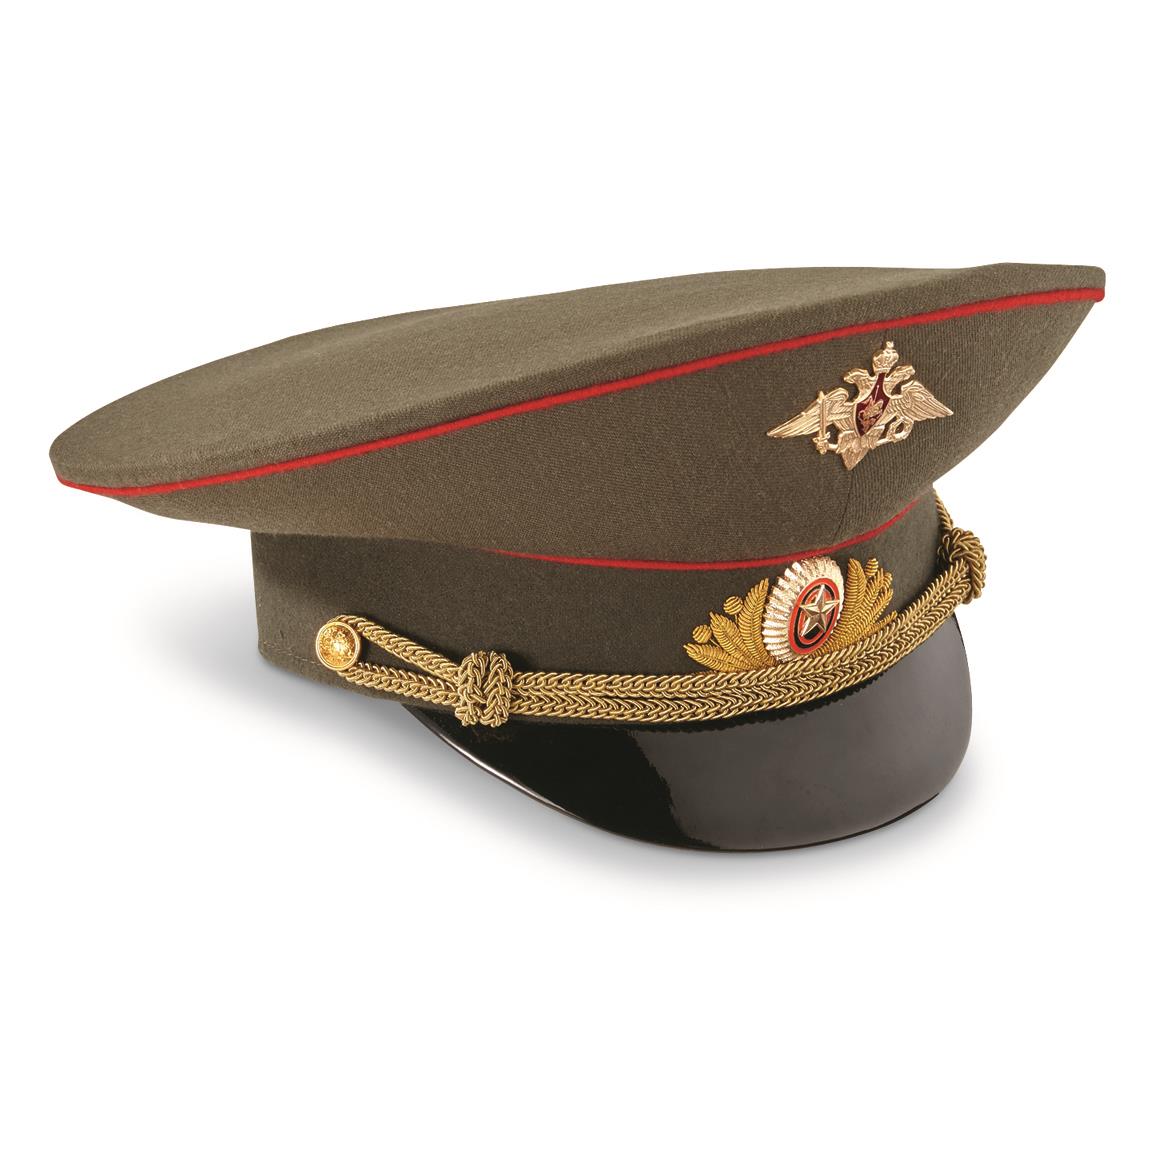 Russian Army Hat - Army Military